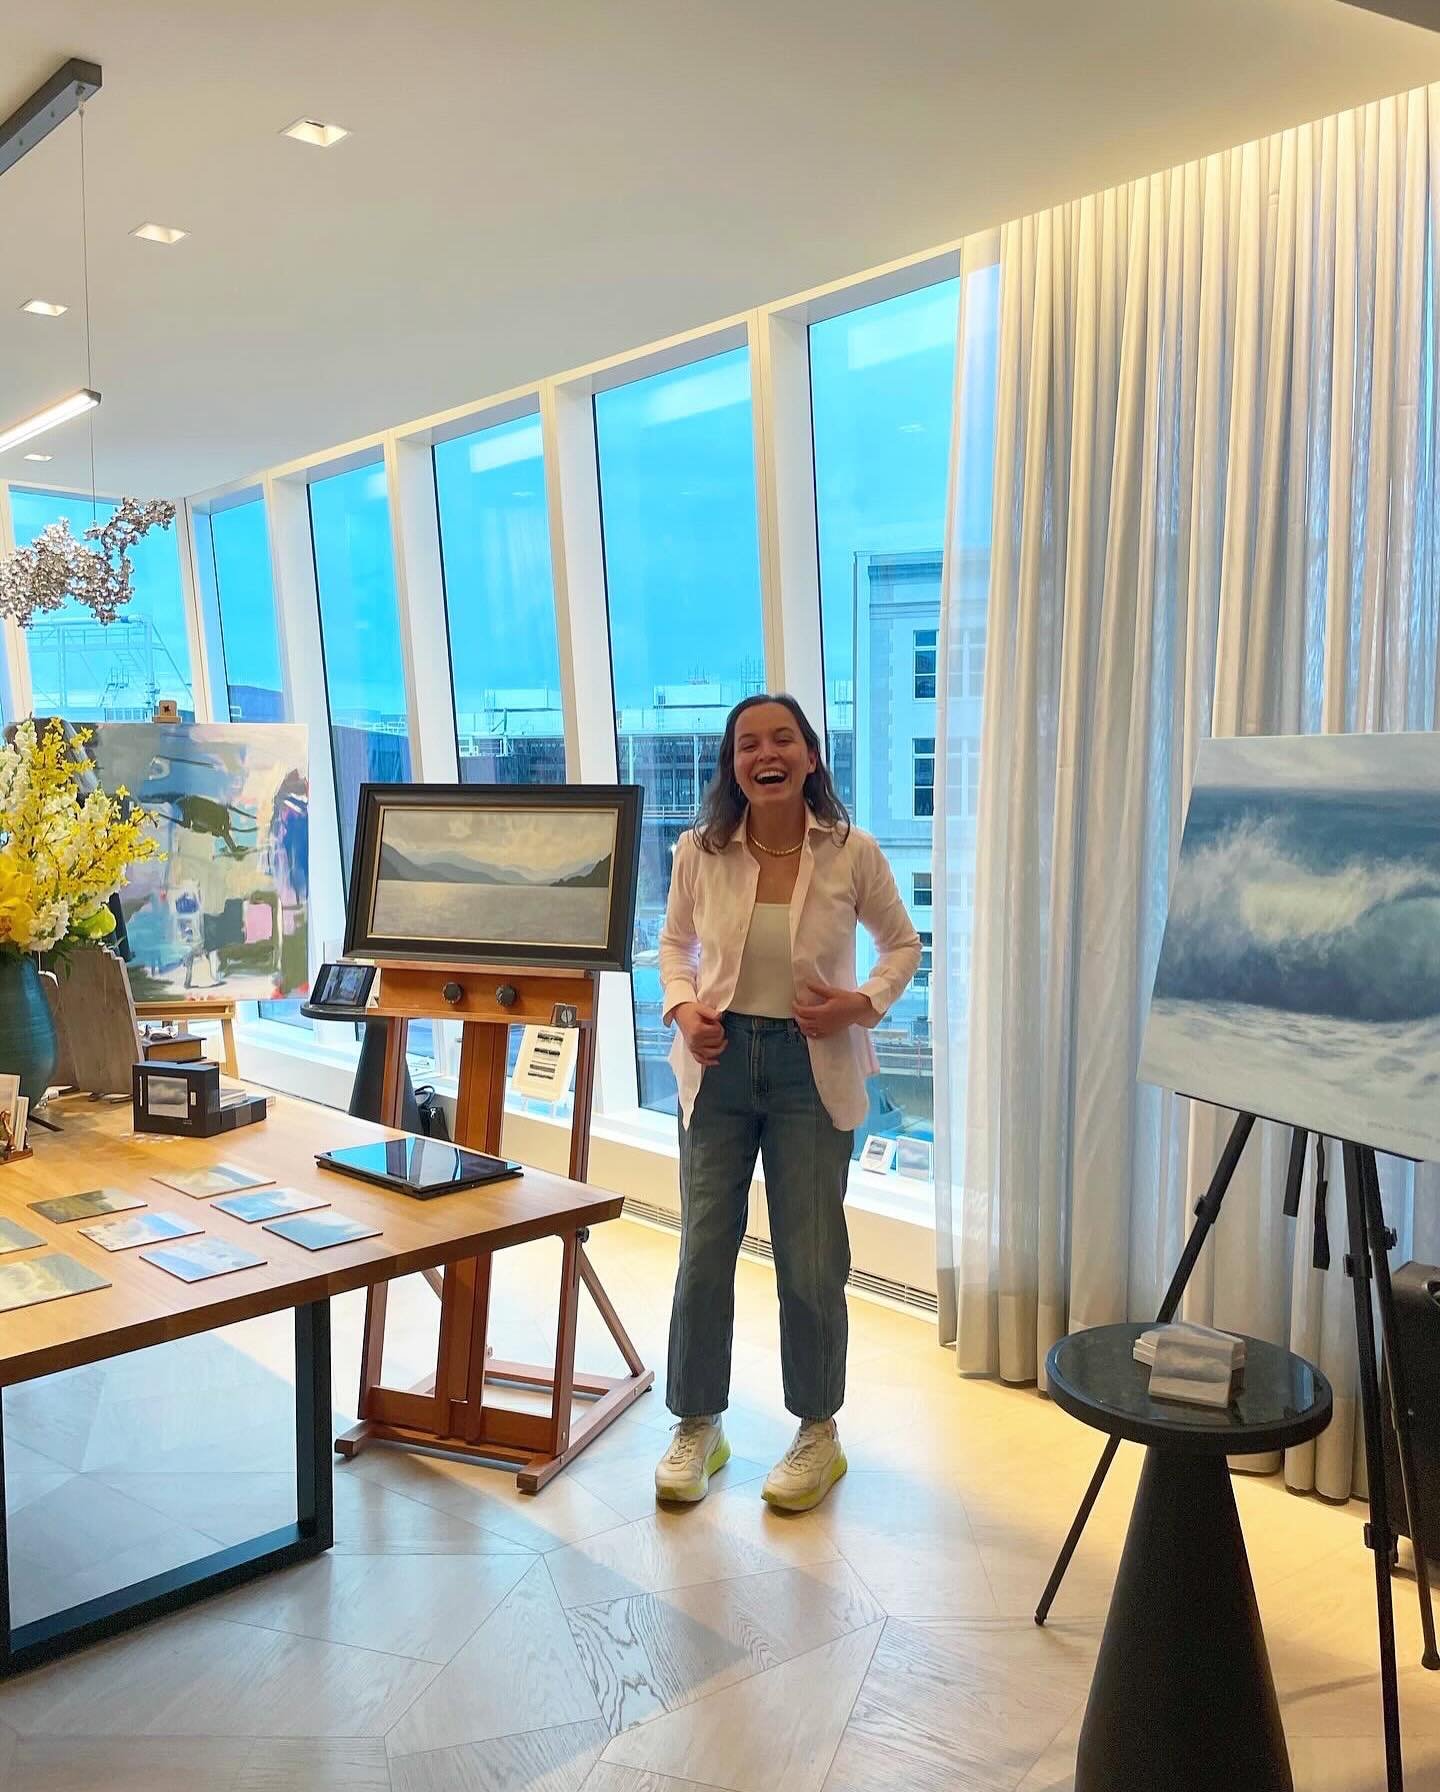 A wonderful Gallery Night at the @stregisresboston Seaport with @canyonranch and fellow artists! A few gems off to new homes and lots of fun talking with the residents about our favorite places on the Cape and Italy.. until next time 🥂 Shirt handmad